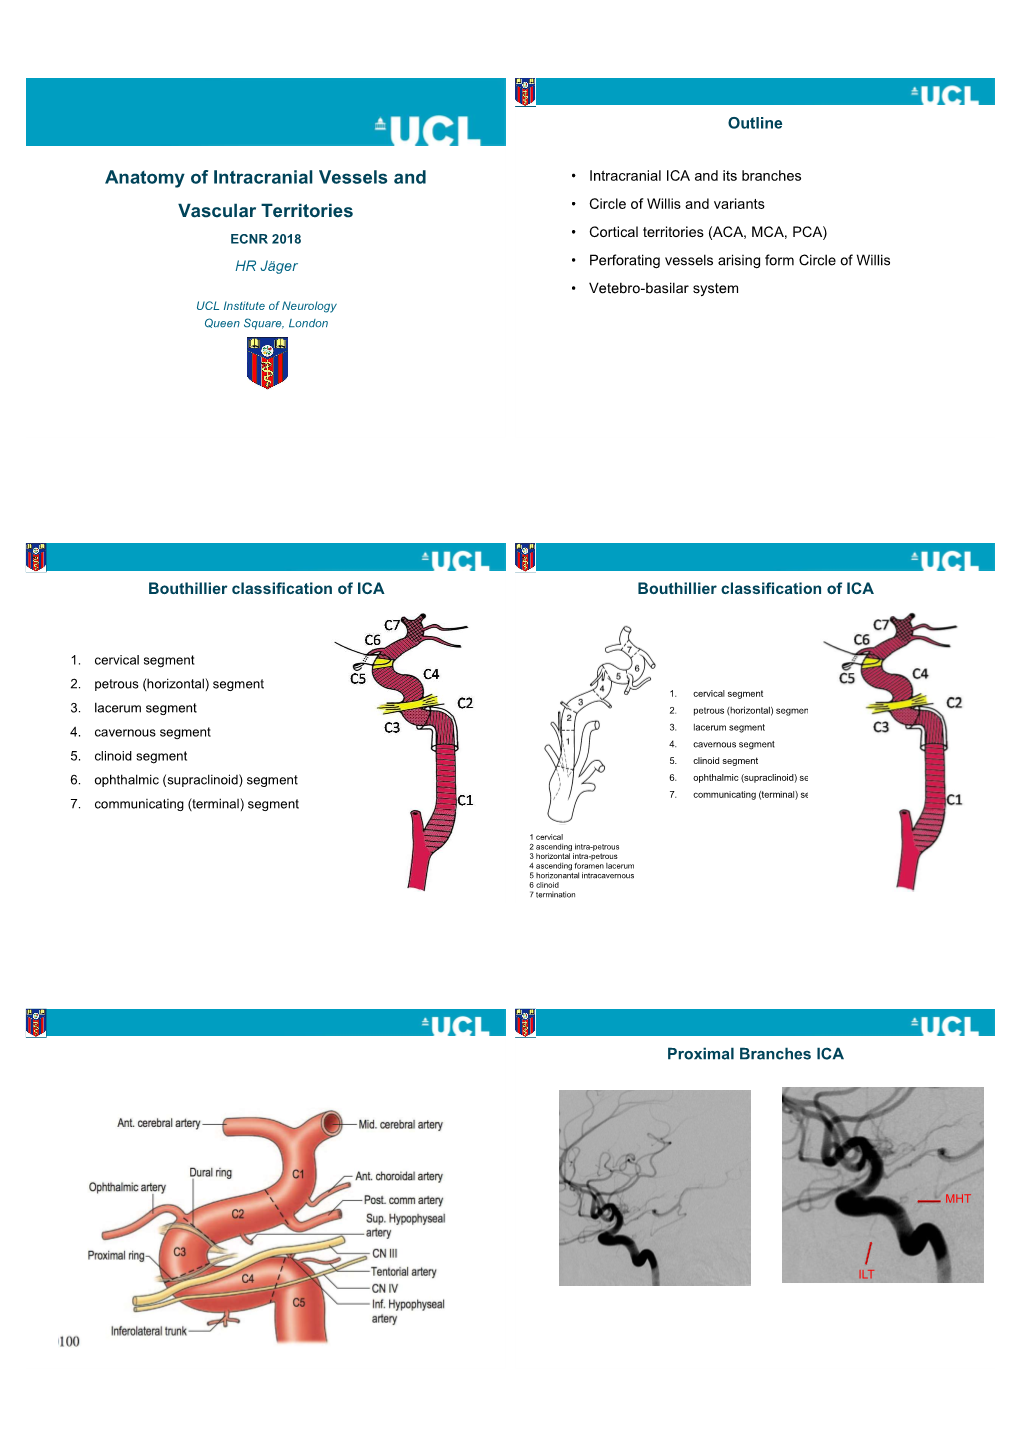 Anatomy of Intracranial Vessels and Vascular Territories